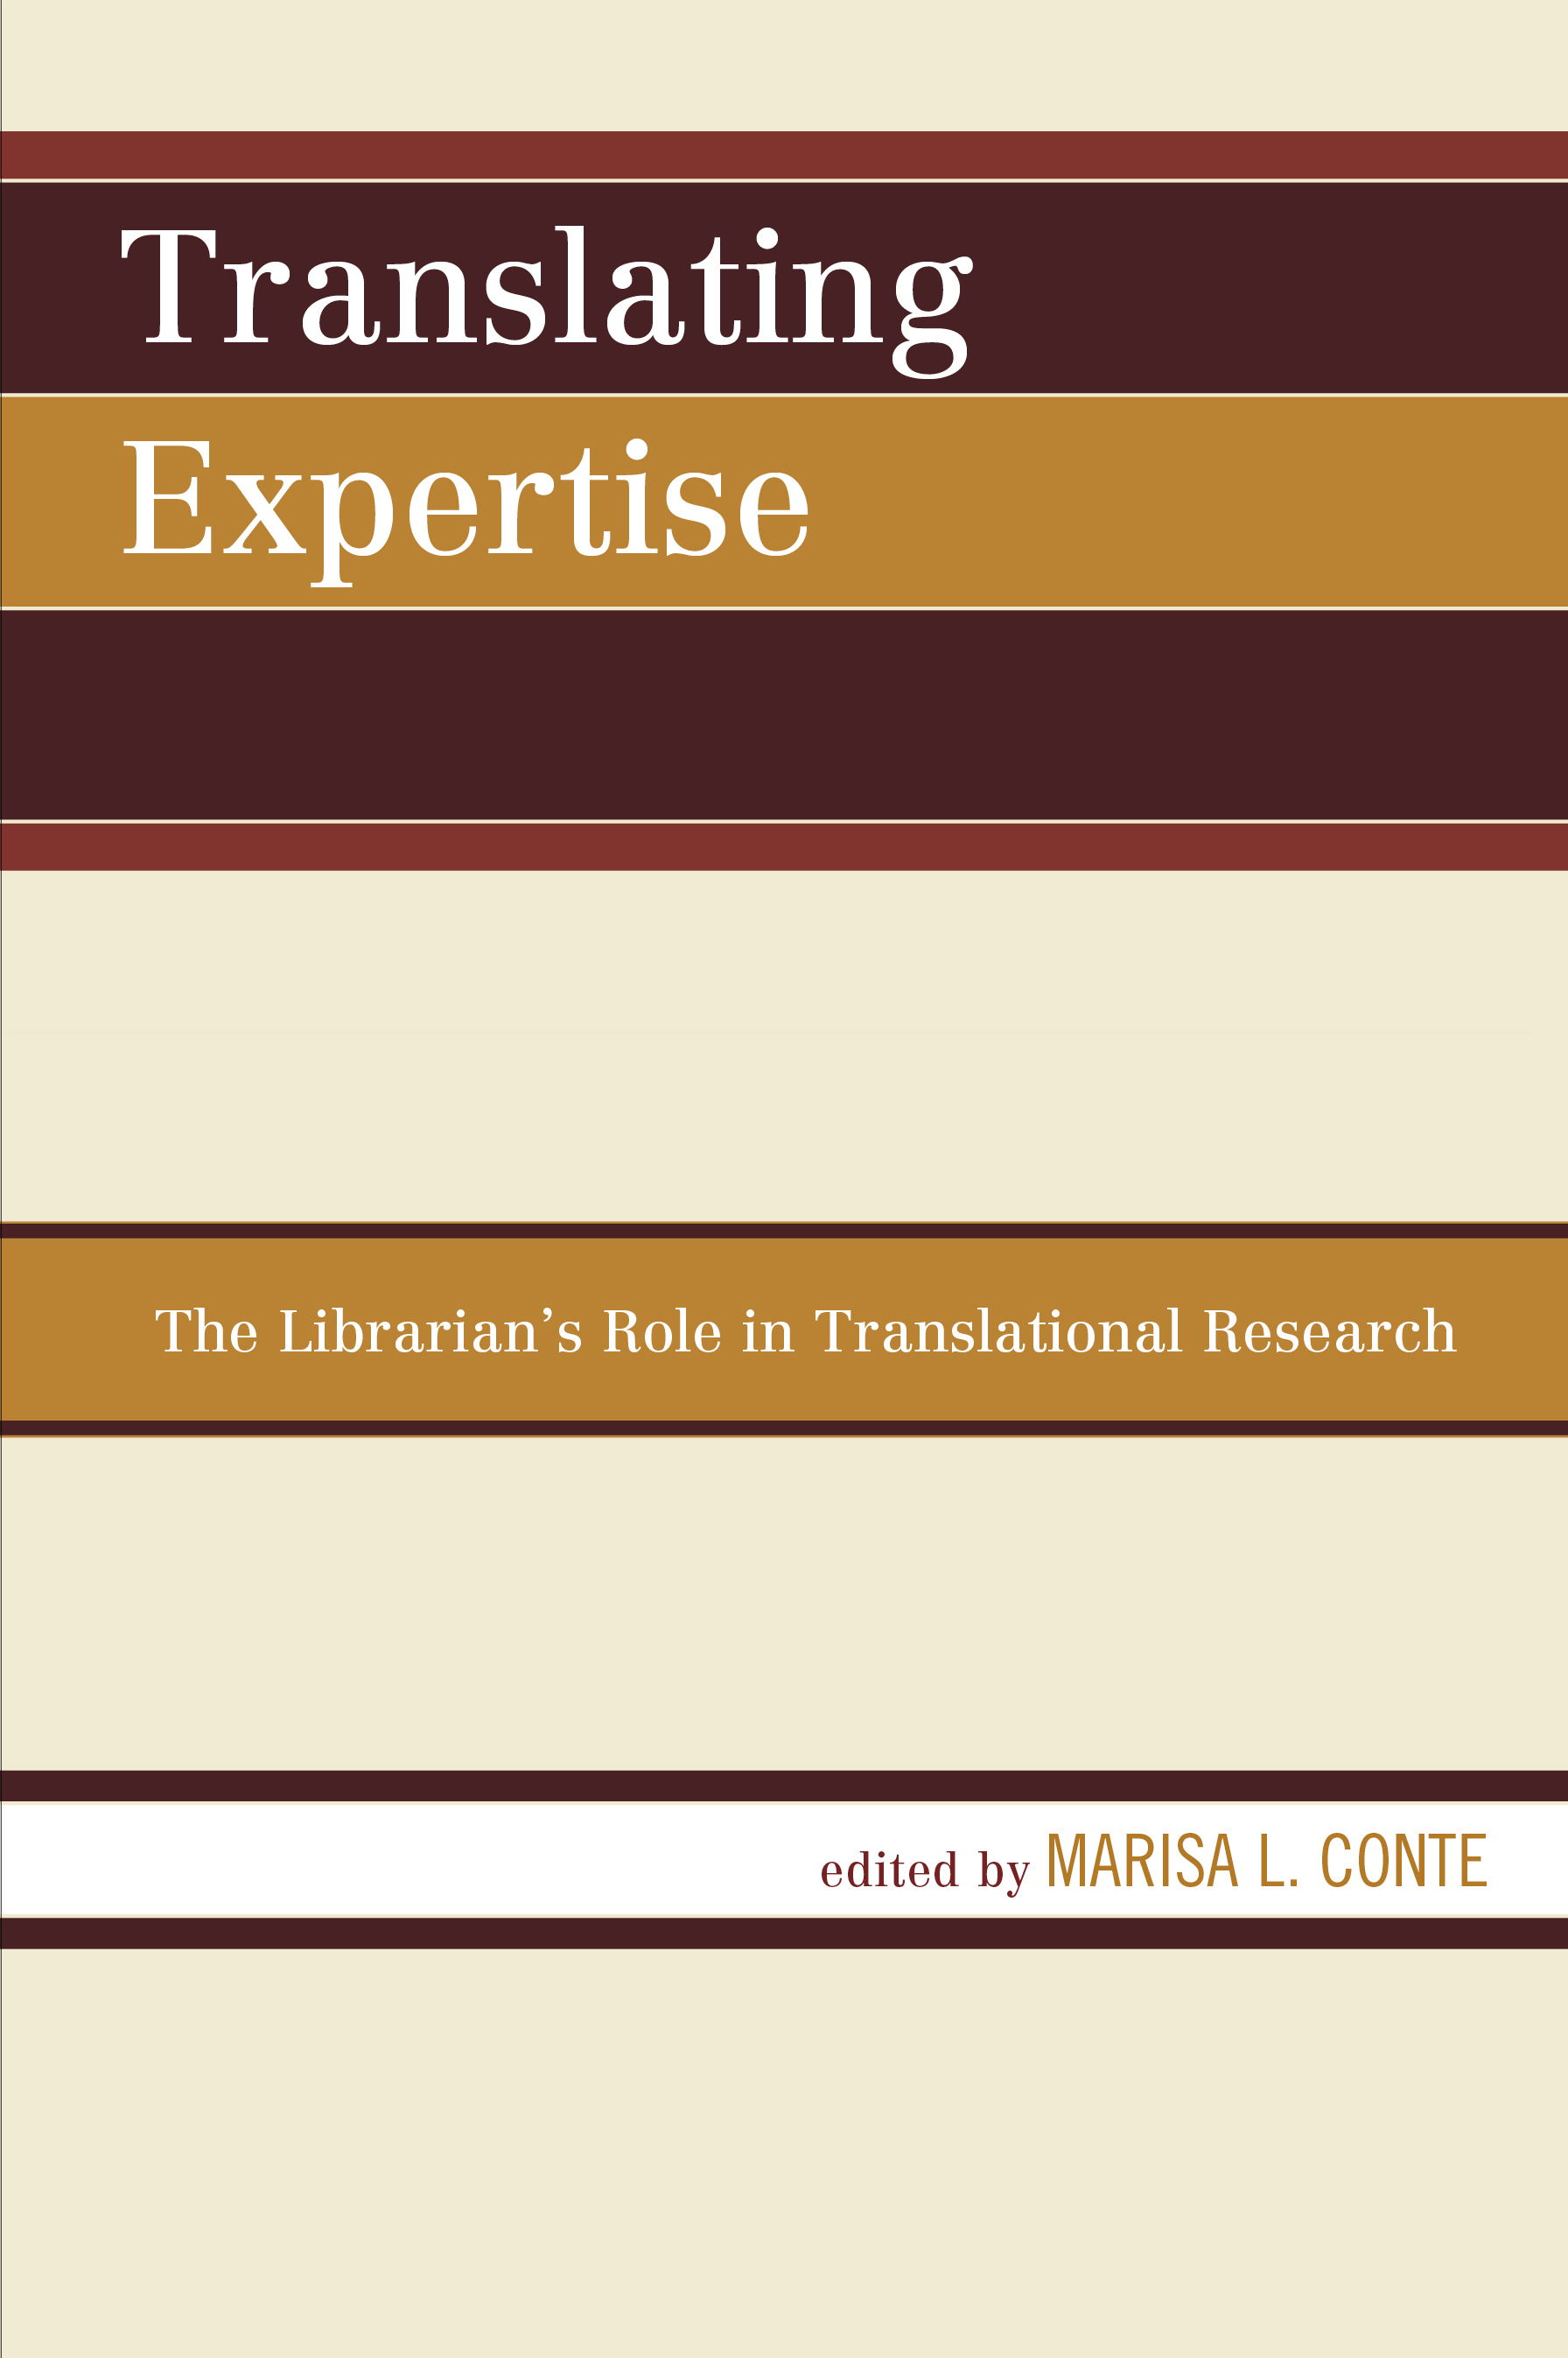 Translating Expertise: The Librarian's Role in Translational Research